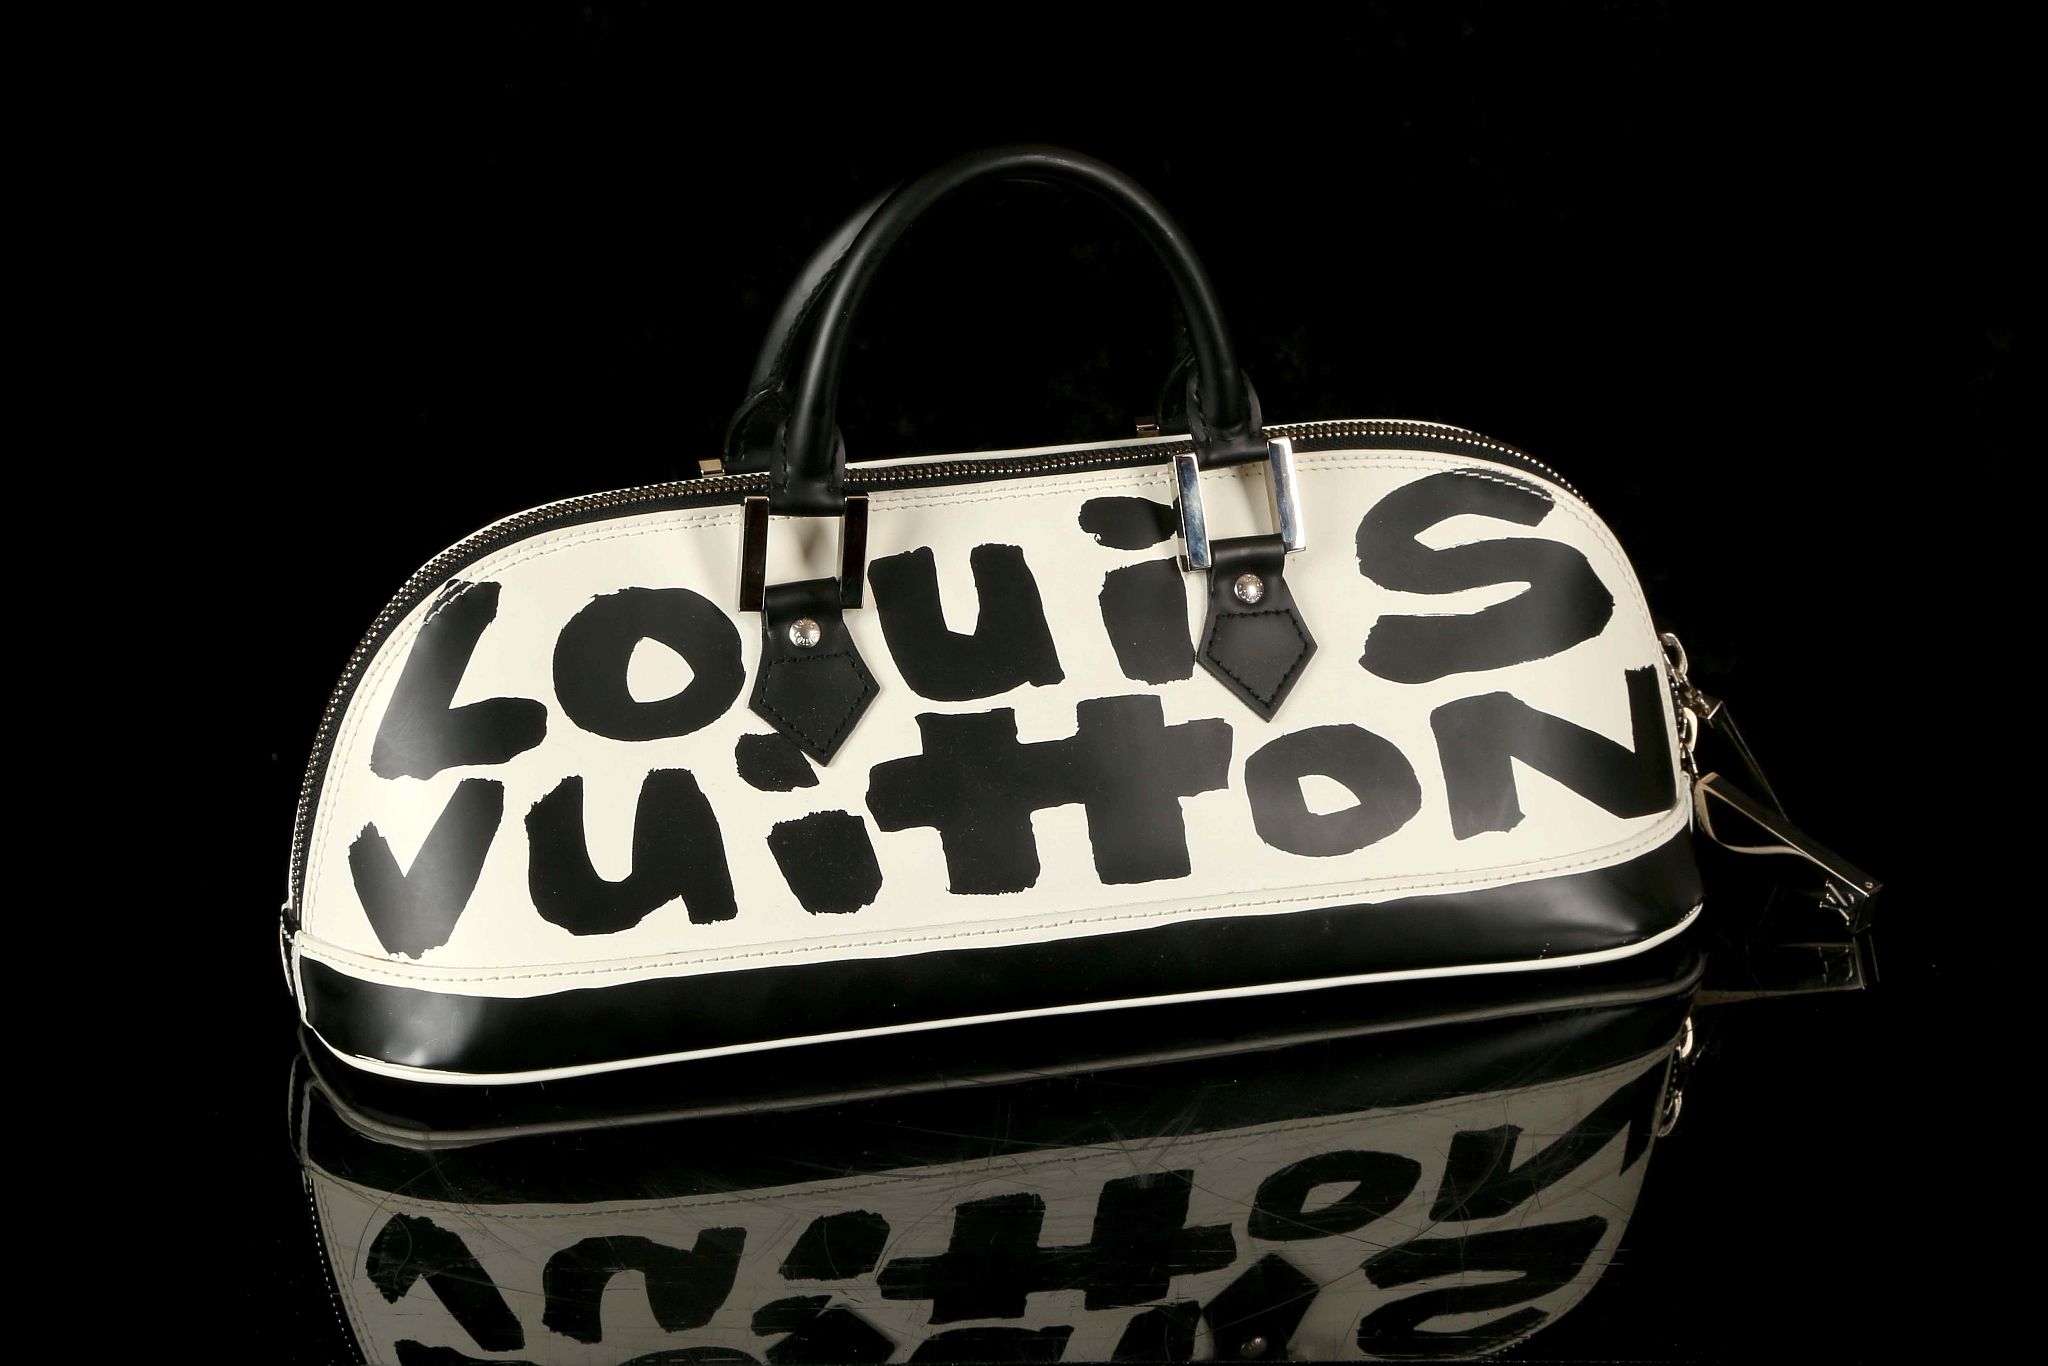 LOUIS VUITTON STEPHEN SPROUSE EAST/WEST ALMA BAG, date code for 2001, black and white graffiti - Image 2 of 14